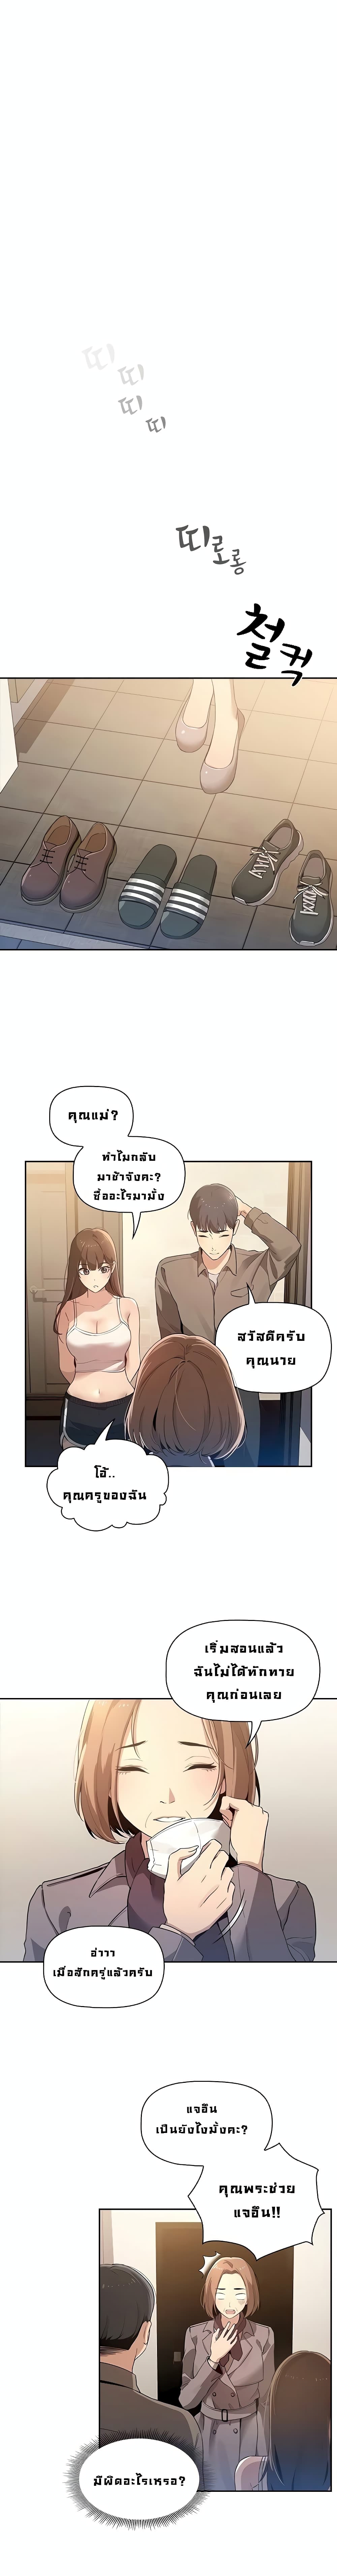 Private Tutoring in These Trying Times 1 ภาพที่ 30